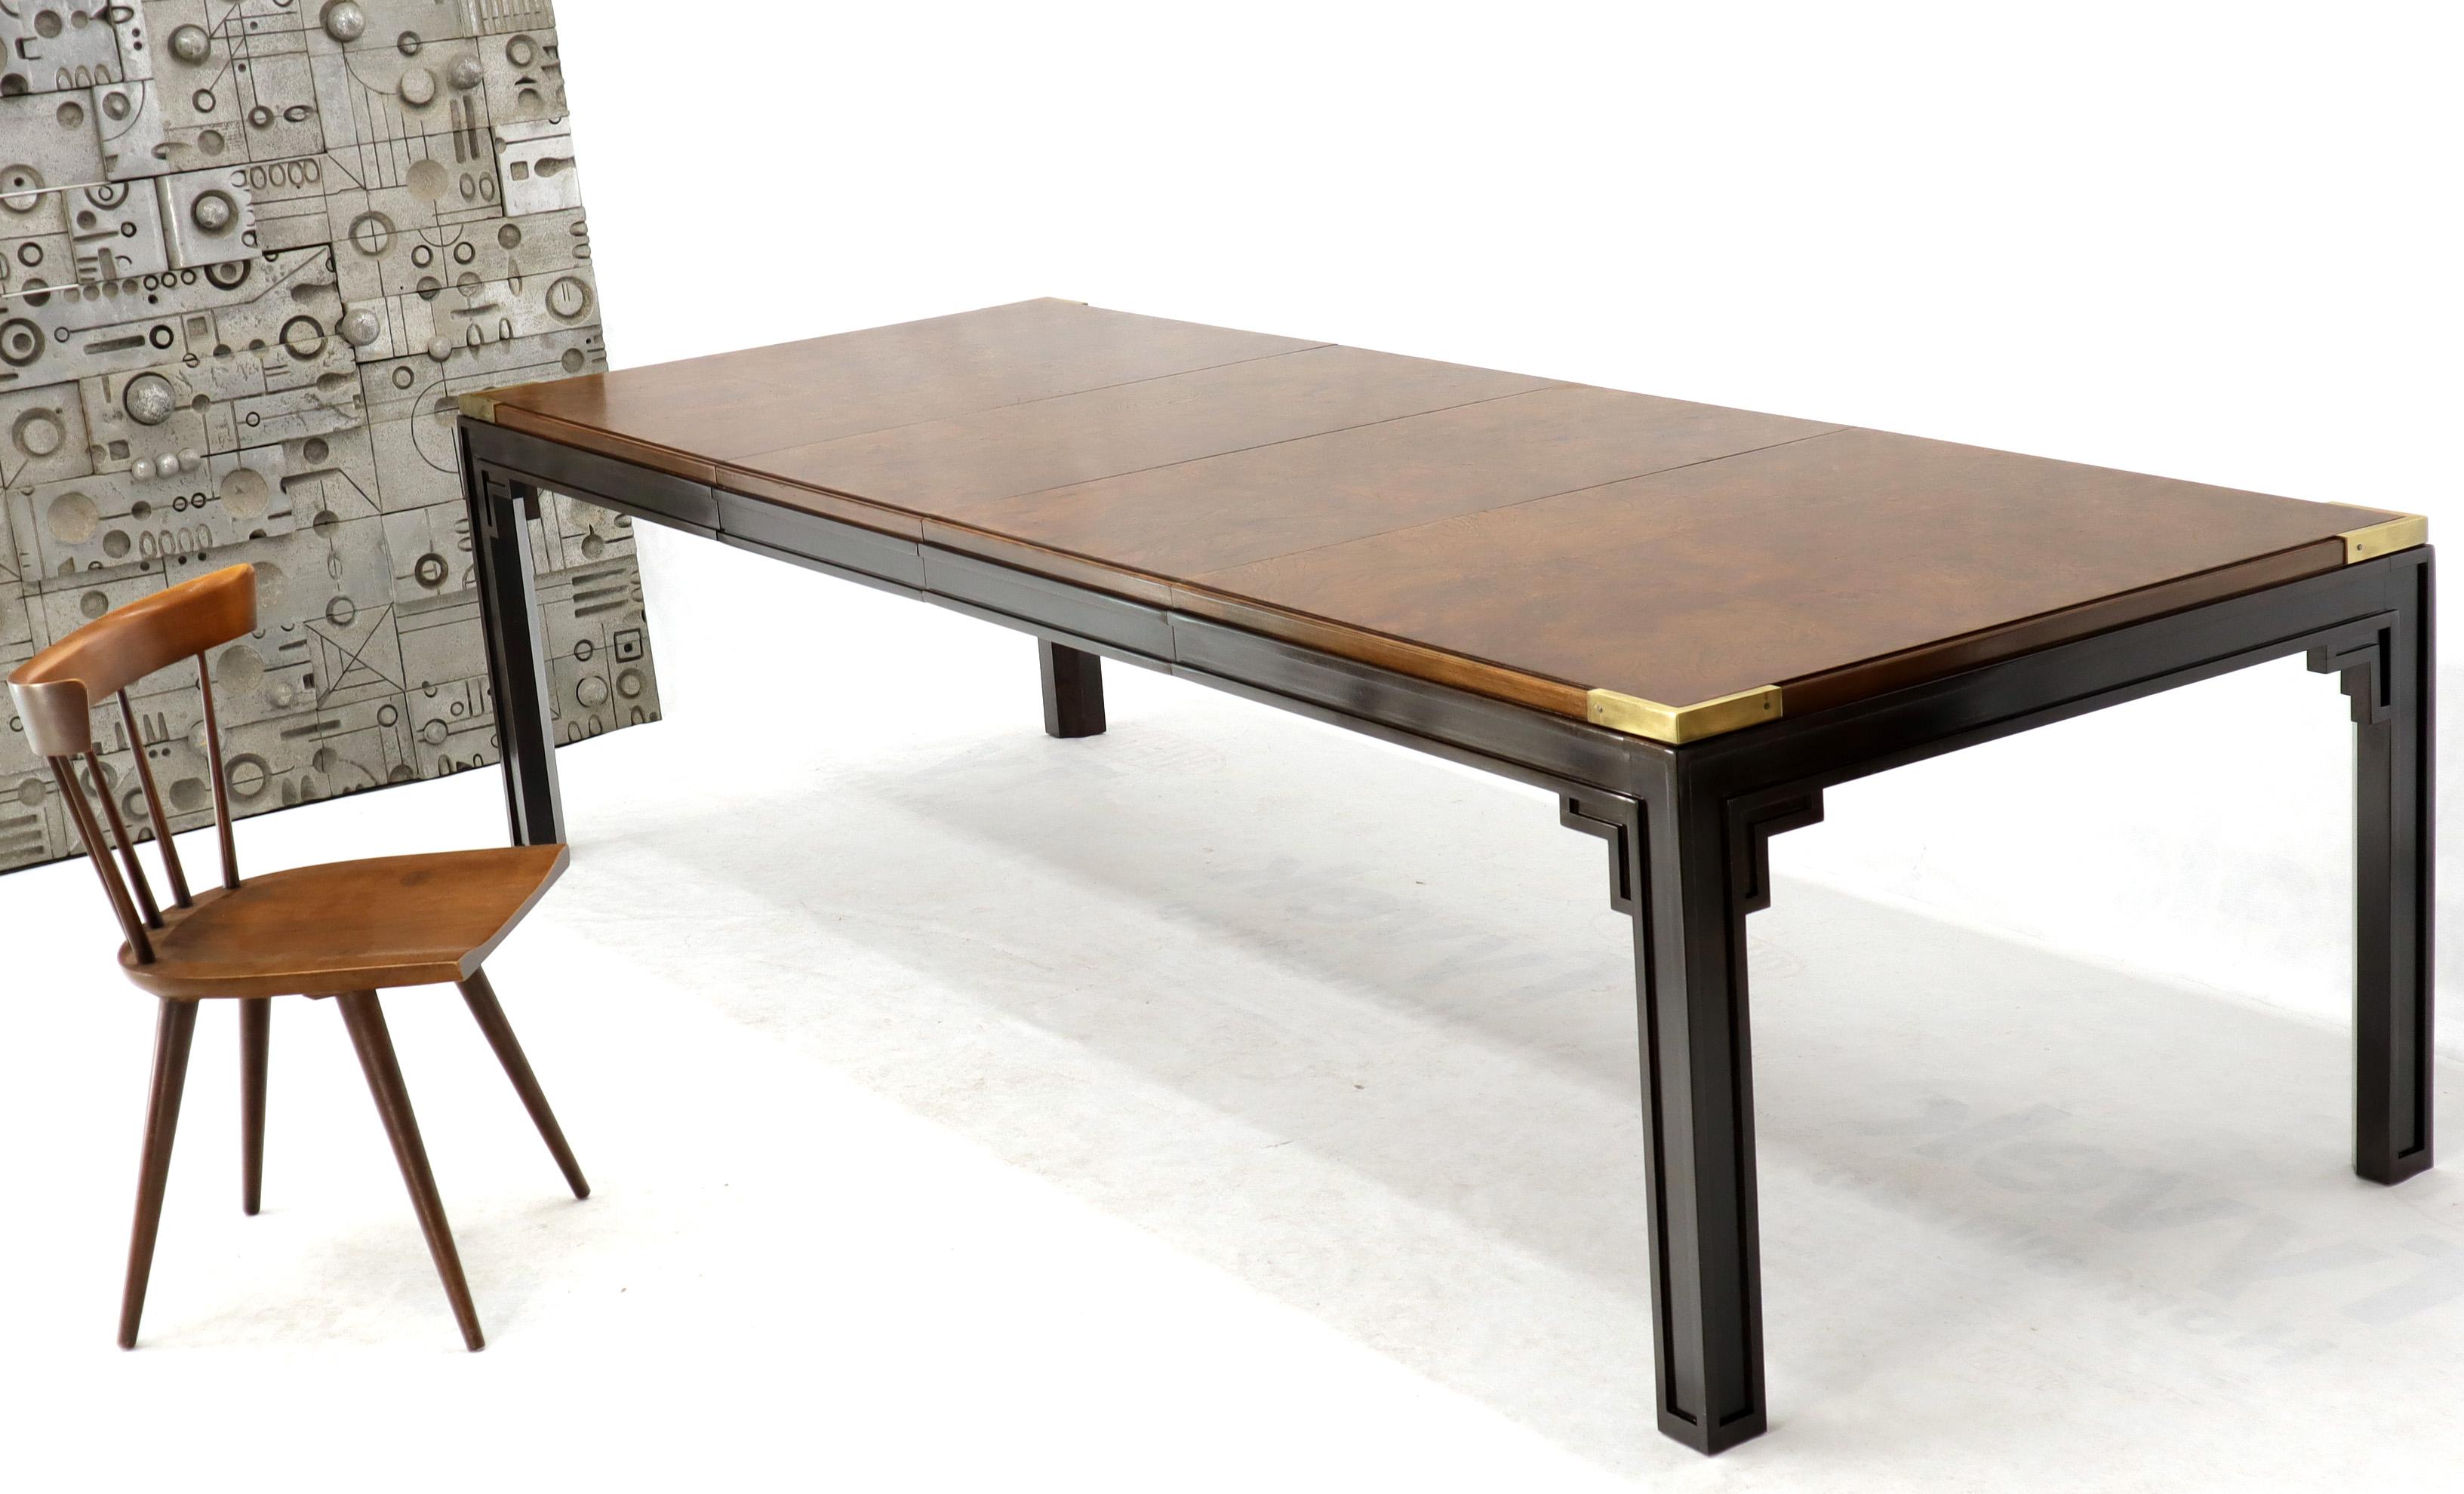 Lacquered Large Burlwood Dining Table with Brass Accents and Two Extension Leaves Boards